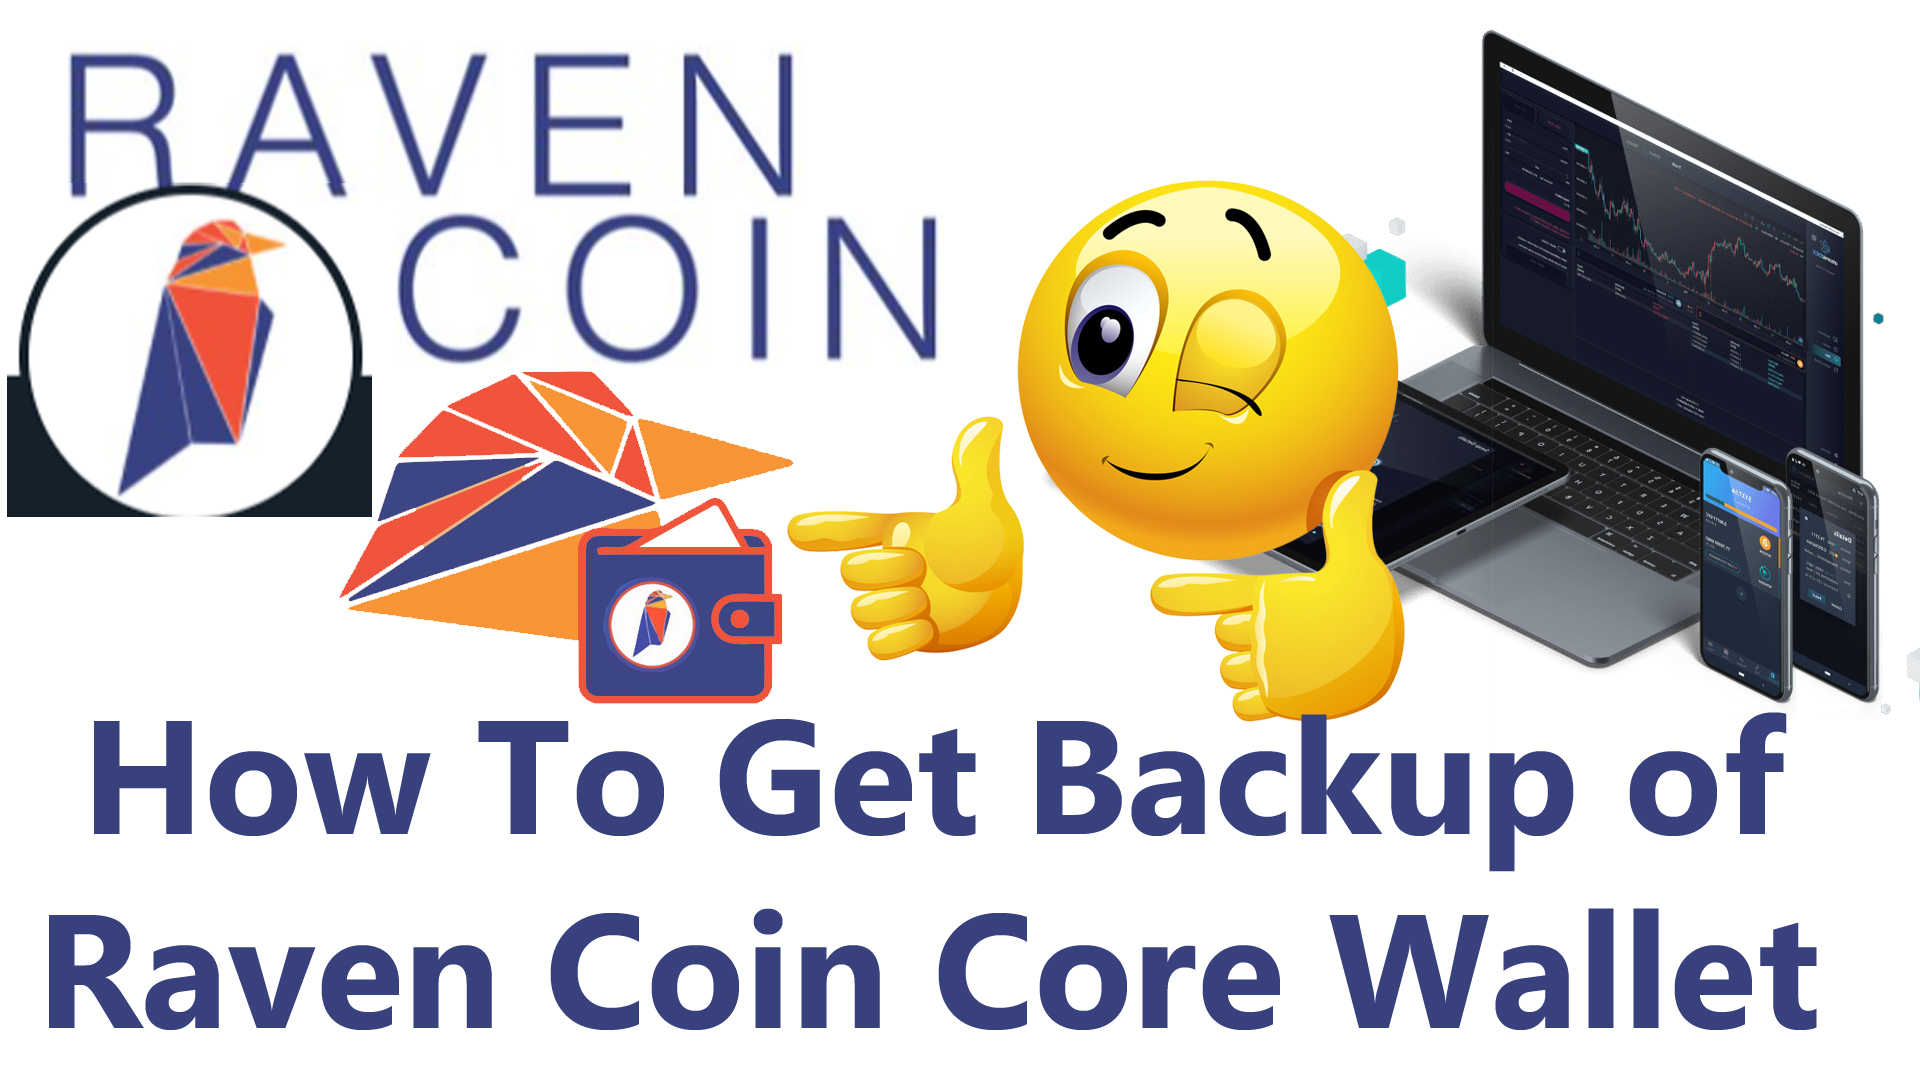 How To Get Backup of Raven Coin Core Wallet | RVN Wallet ...